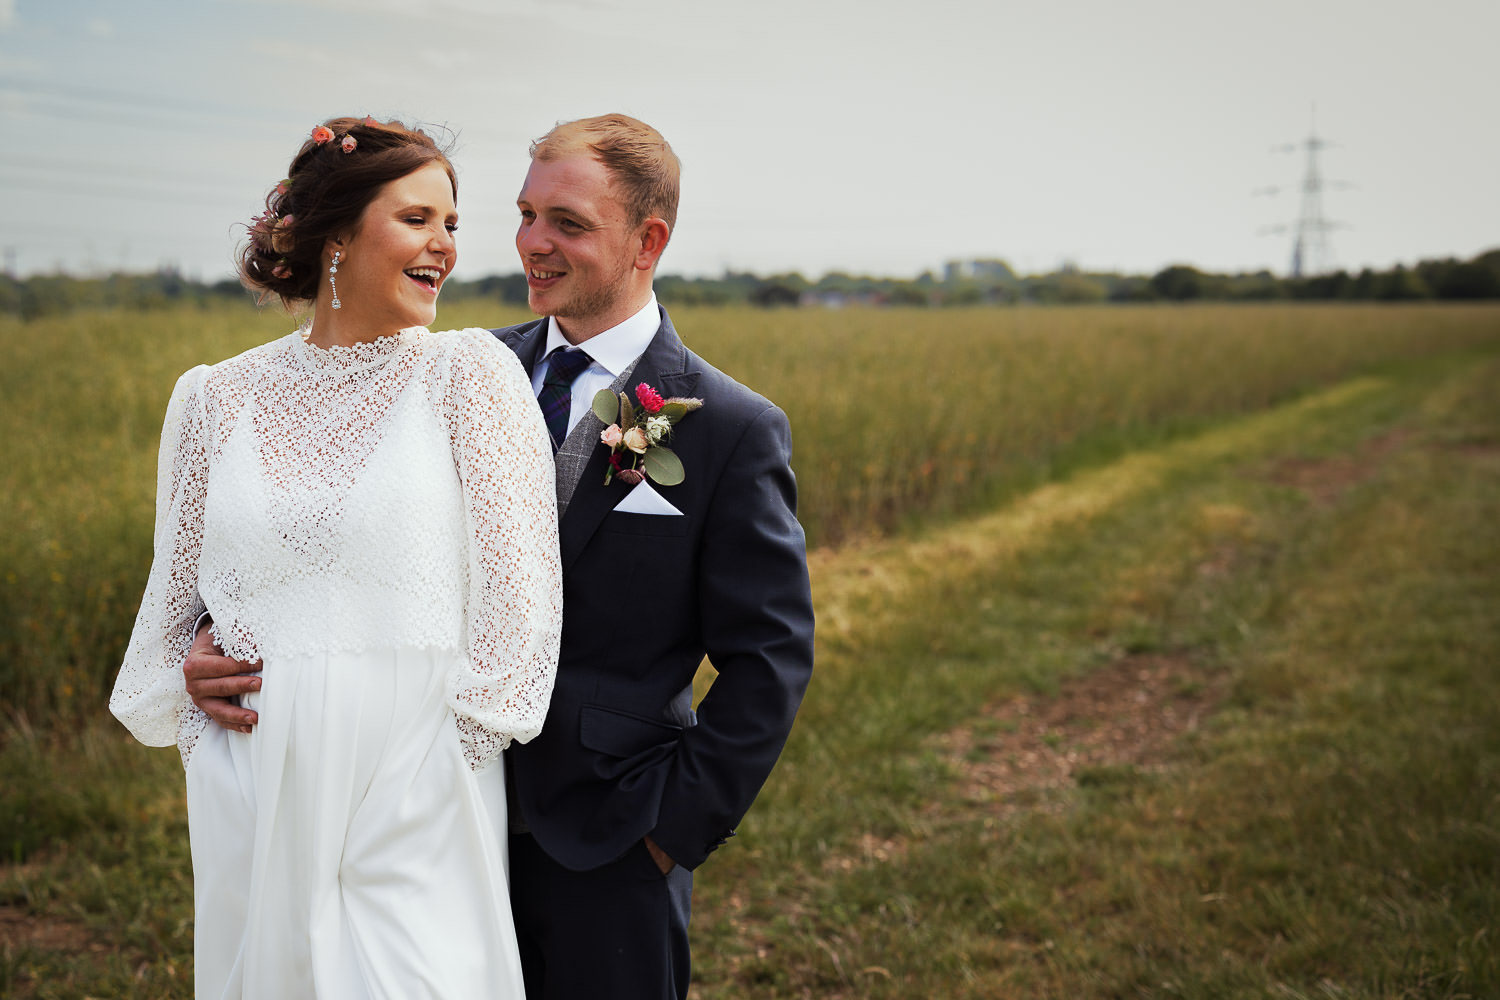 A bride and groom, who are expecting a baby, on their wedding day laughing together in a field in Debden Green.